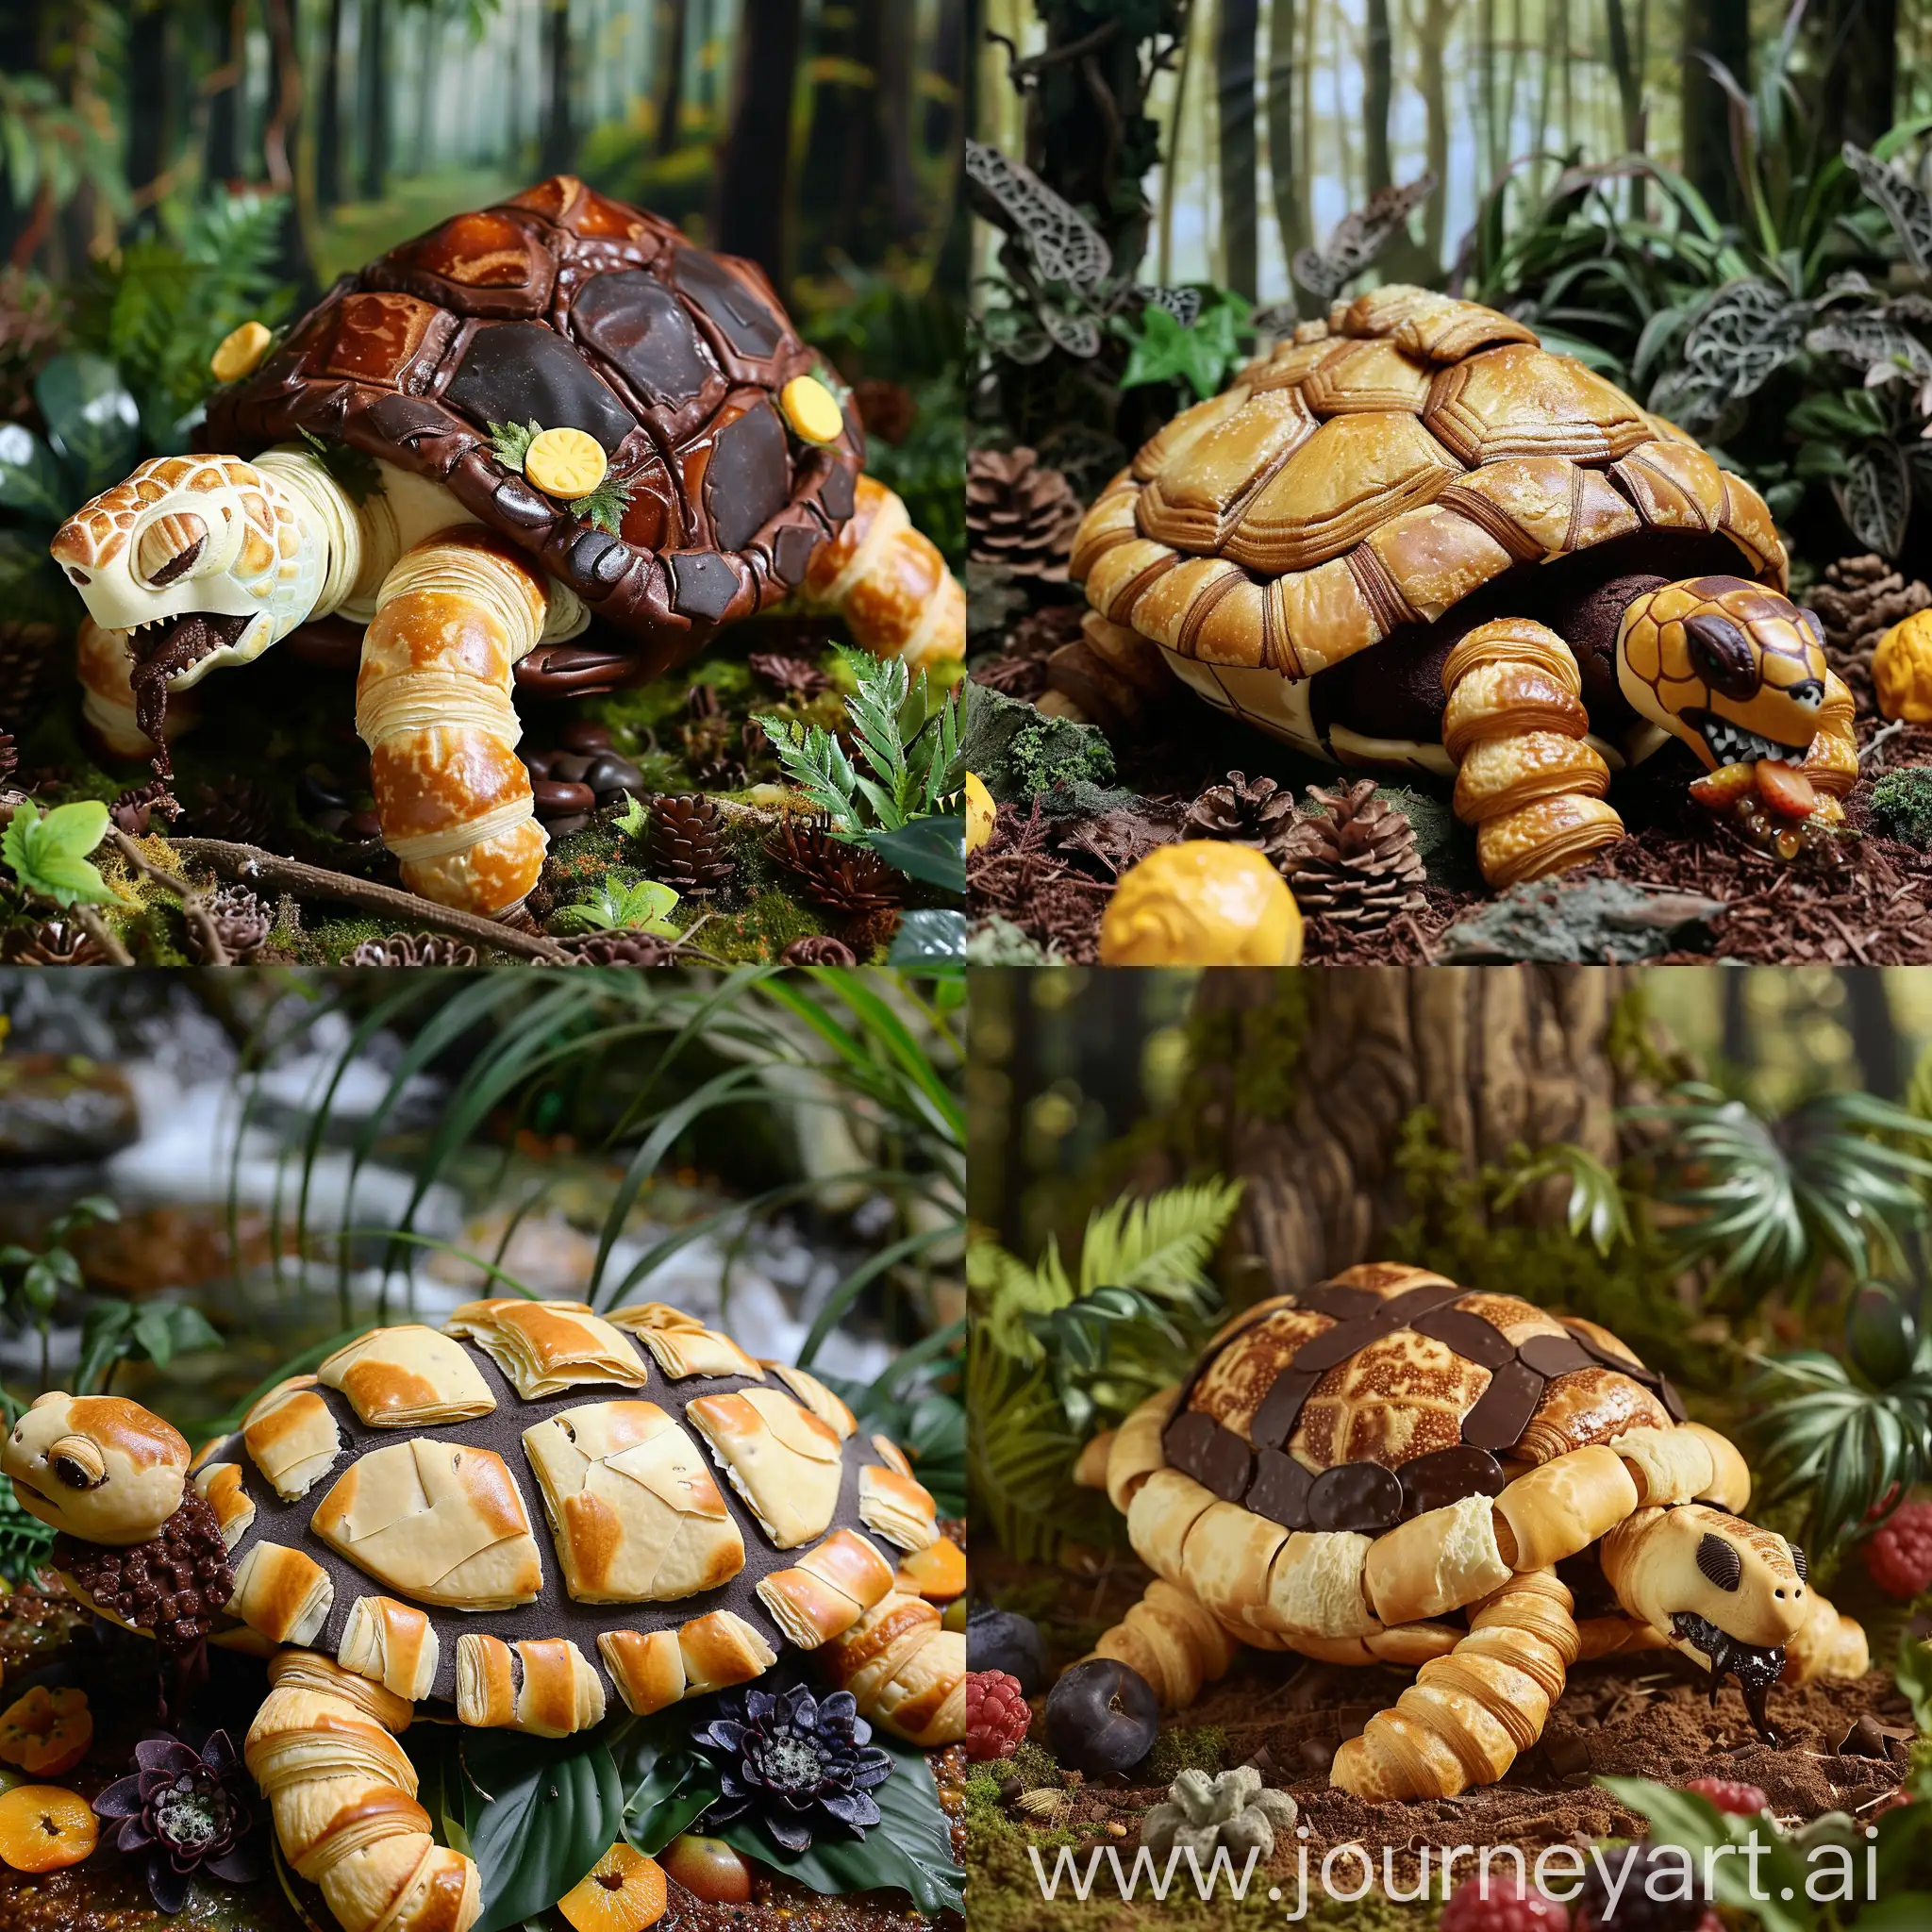 A realistic turtle with skin and shell made of croissants, eating chocolate fruit in french setting reminiscing of jurassic park